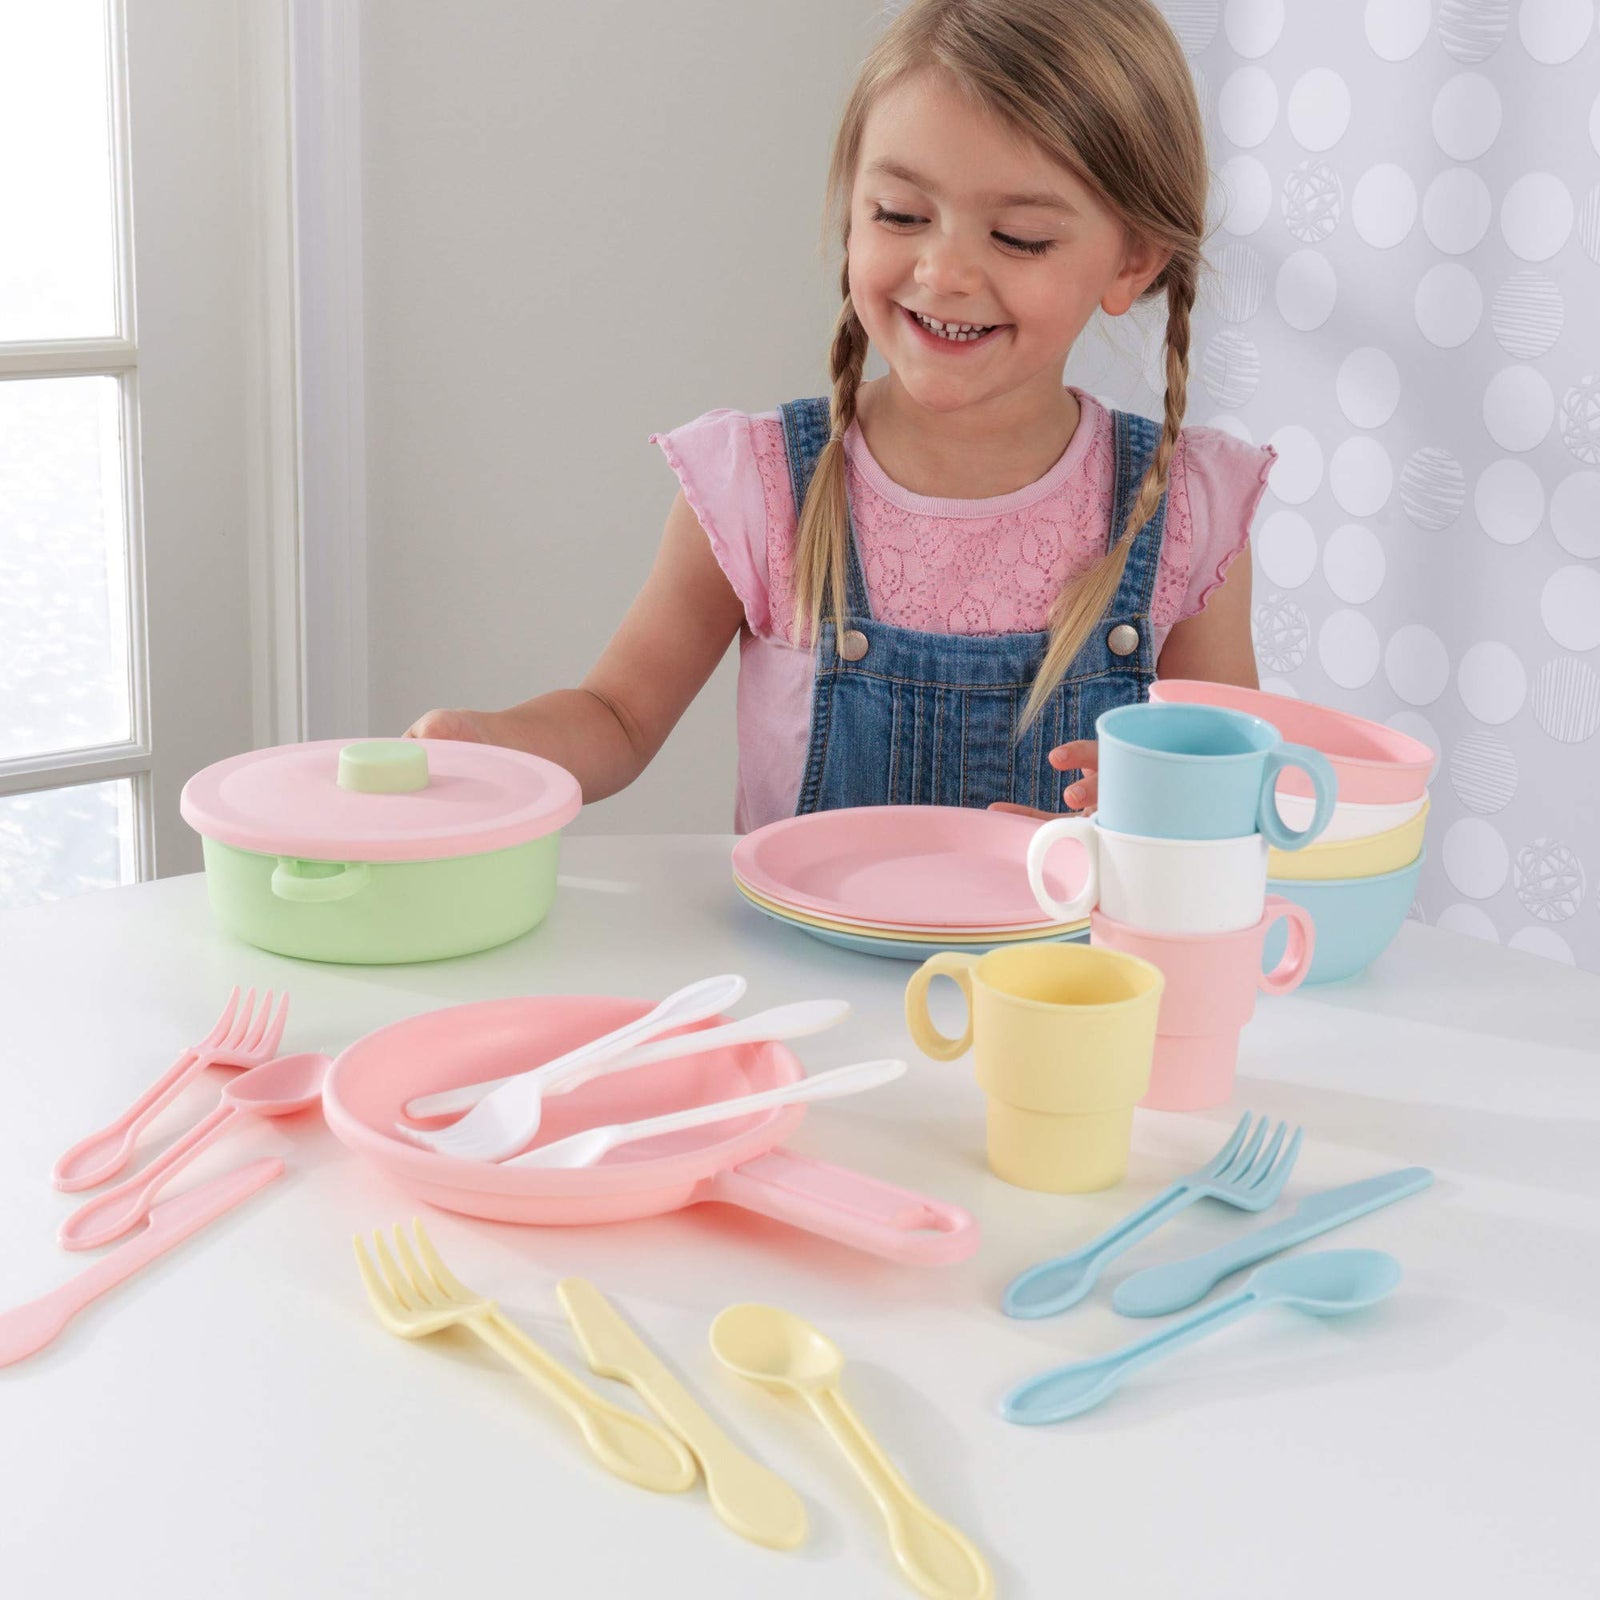 KidKraft 27-Piece Pastel Cookware Set, Plastic Dishes and Utensils for Play Kitchens, Gift for Ages 18 mo+